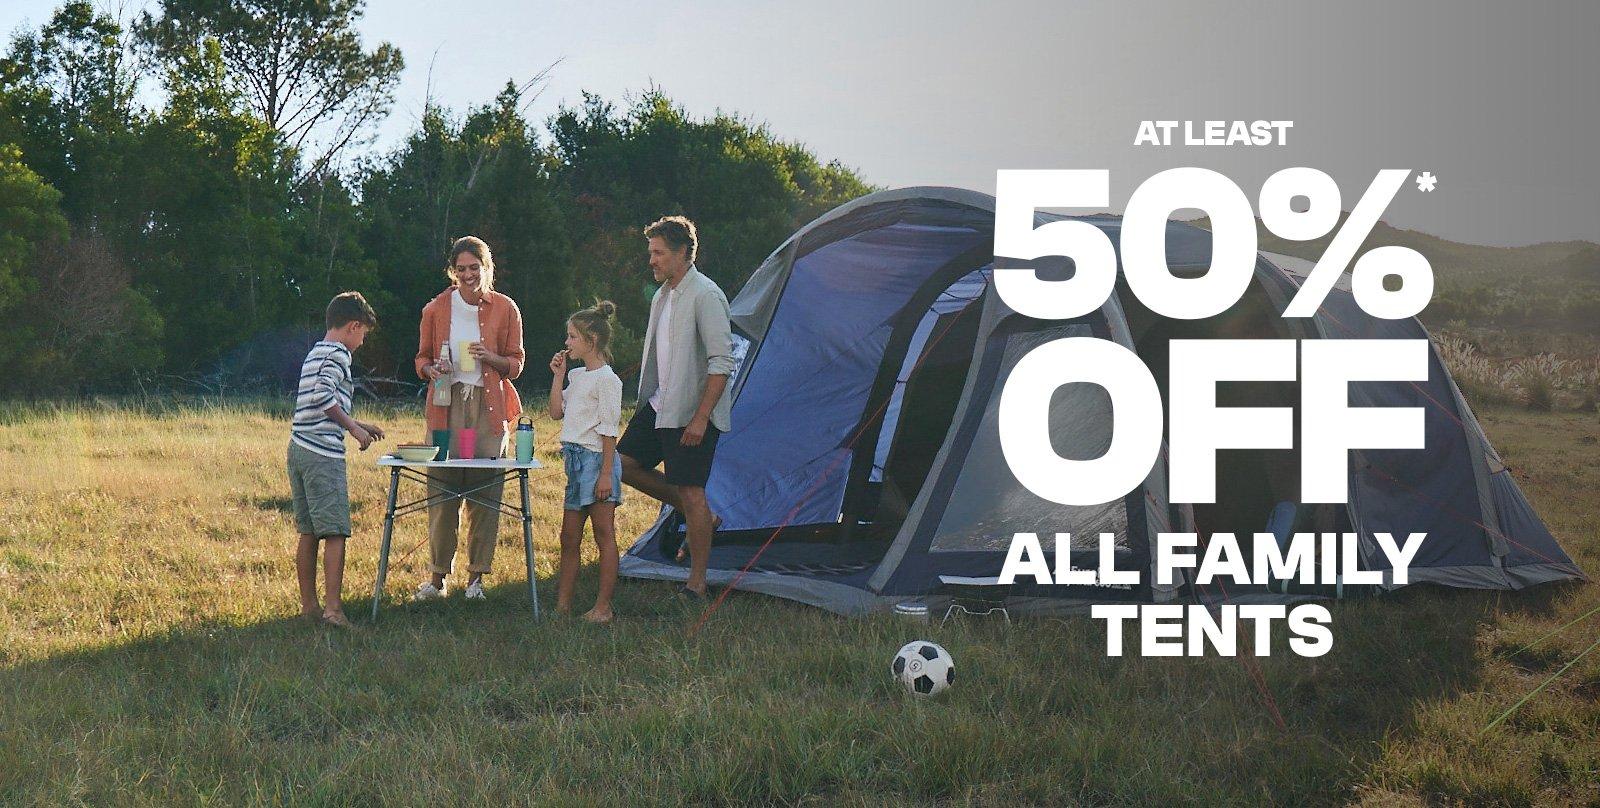 At Least 50% OFF All Family Tents